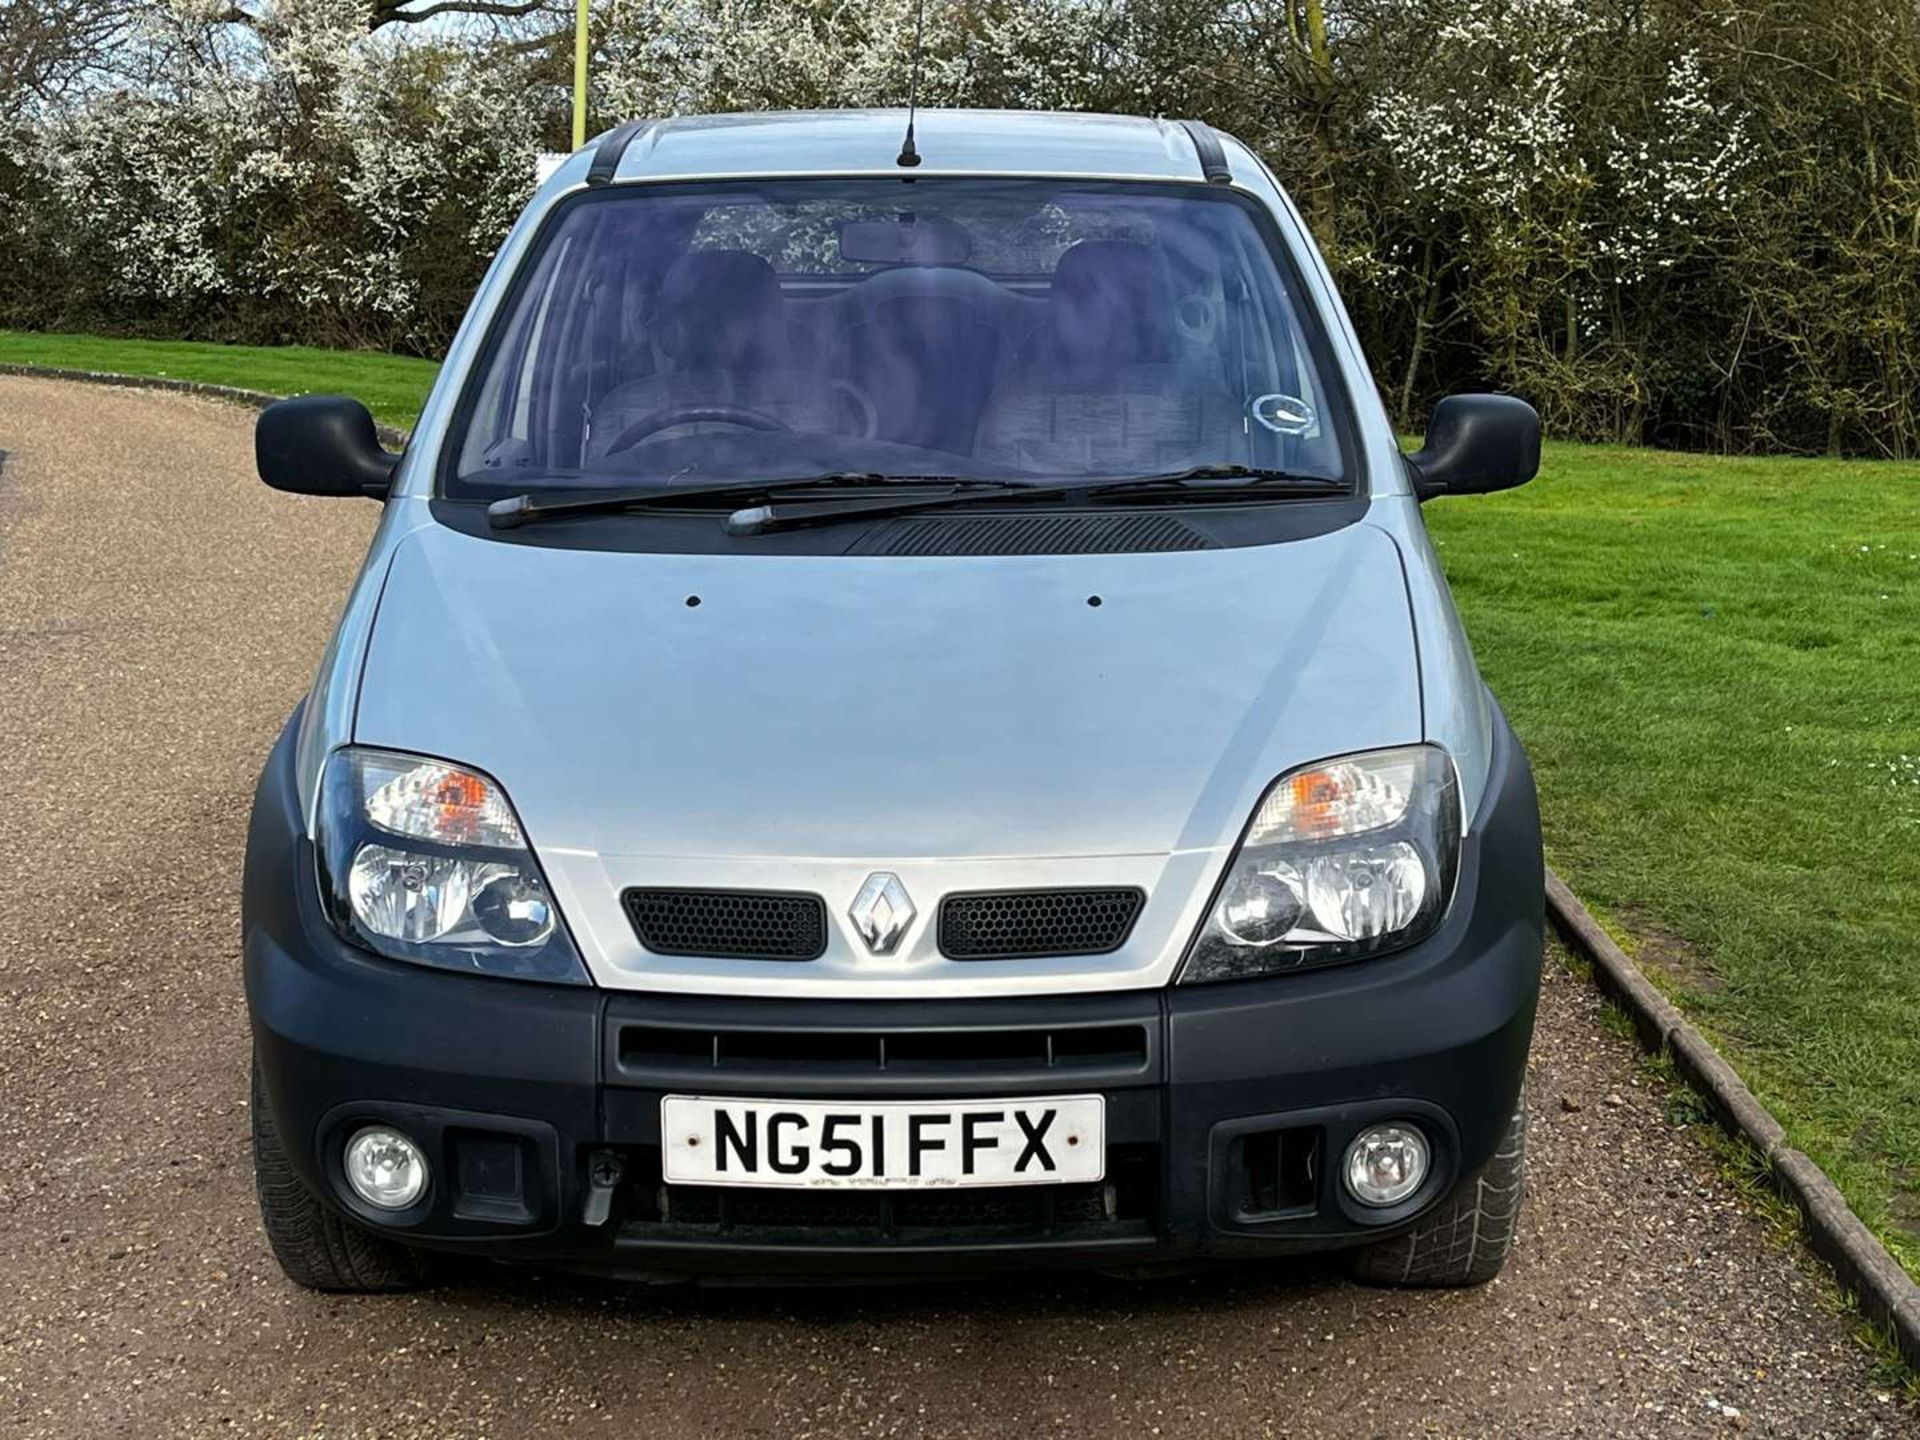 2001 RENAULT MEGANE SCENIC RX4 EXP DCI - Image 2 of 29